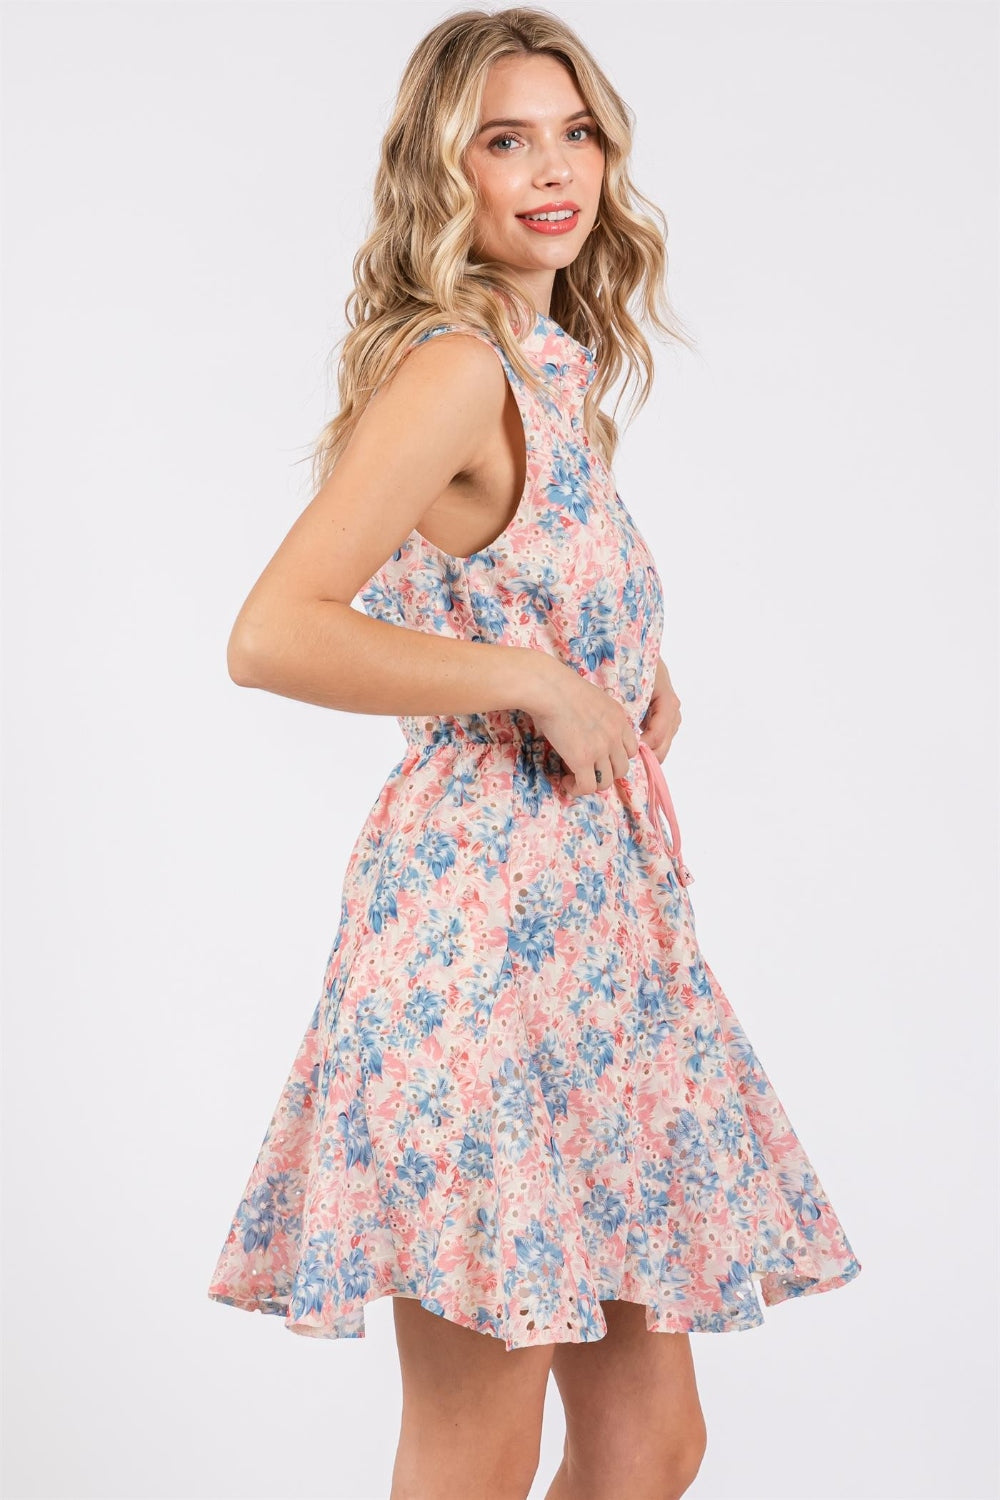 GeeGee Full Size Floral Eyelet Sleeveless Mini Dress-Dresses-Inspired by Justeen-Women's Clothing Boutique in Chicago, Illinois